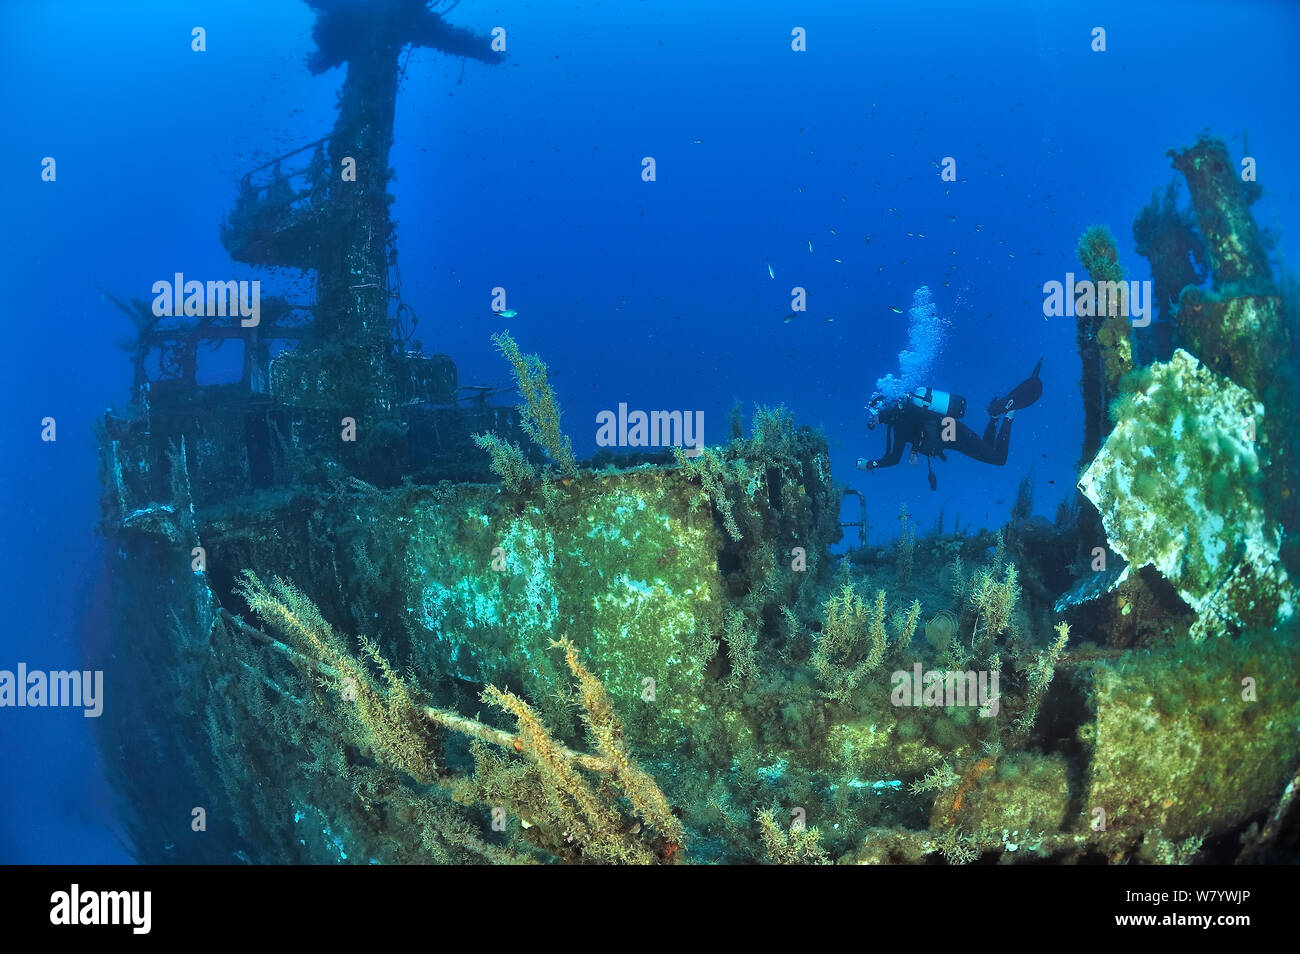 Diver exploring the wreck of the P29 patrol boat scuttled as an artificial dive site in August 2007. Wreck covered in algae and invertebrates. Malta, Mediterranean Sea. June 2014. Stock Photo